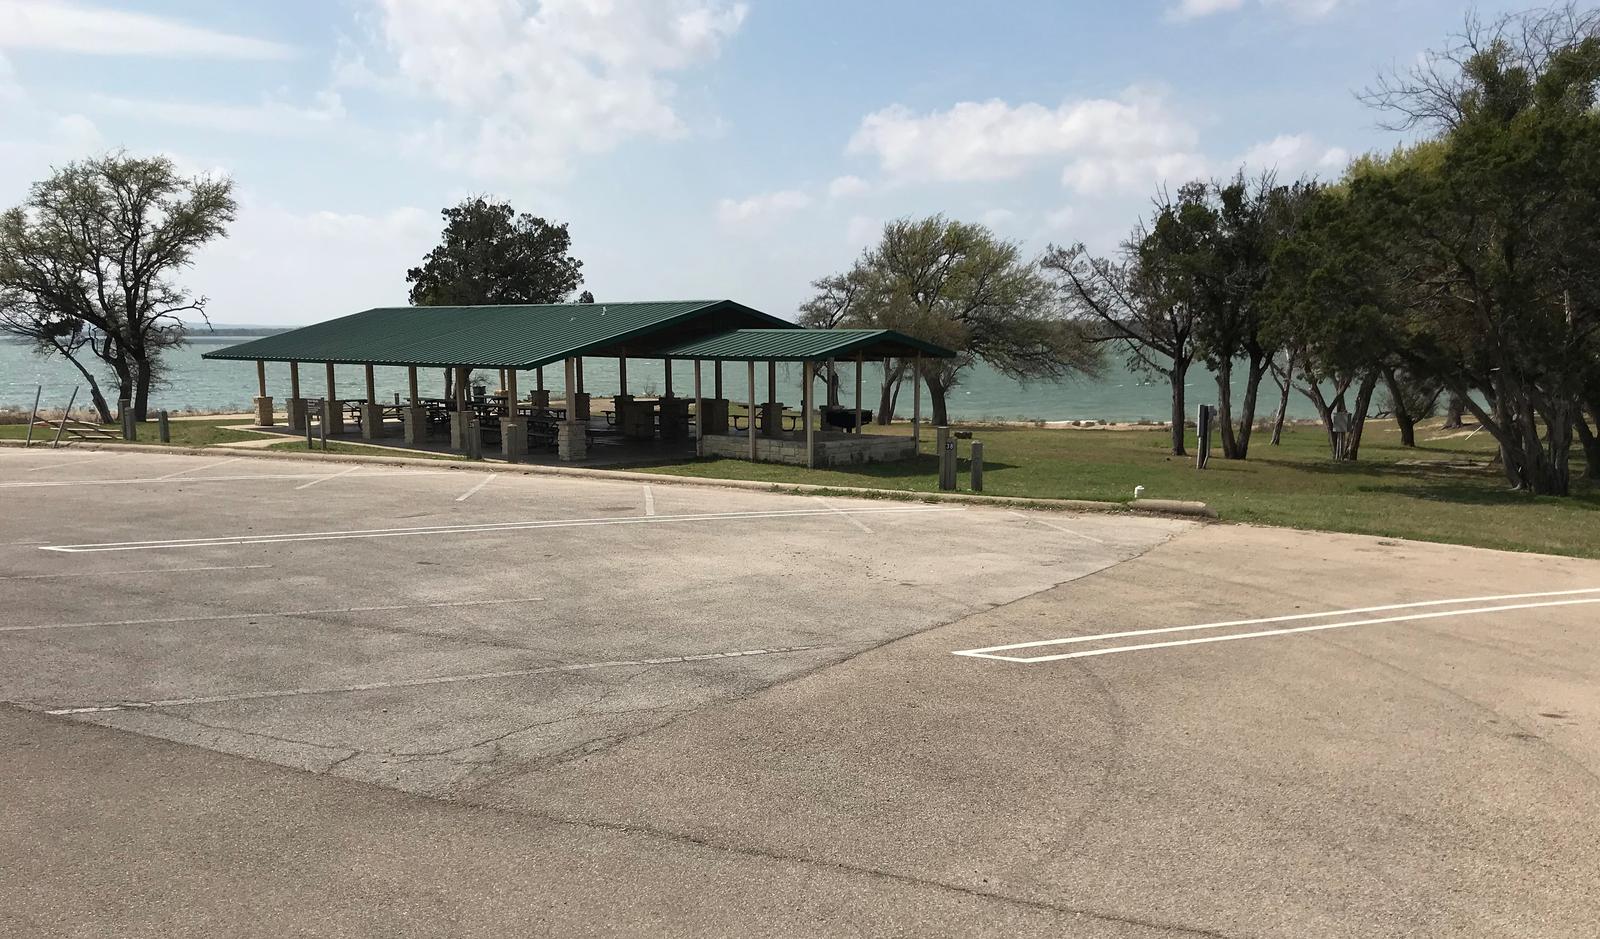 RV  hookup area and Group Shelter with Waco Lake in background